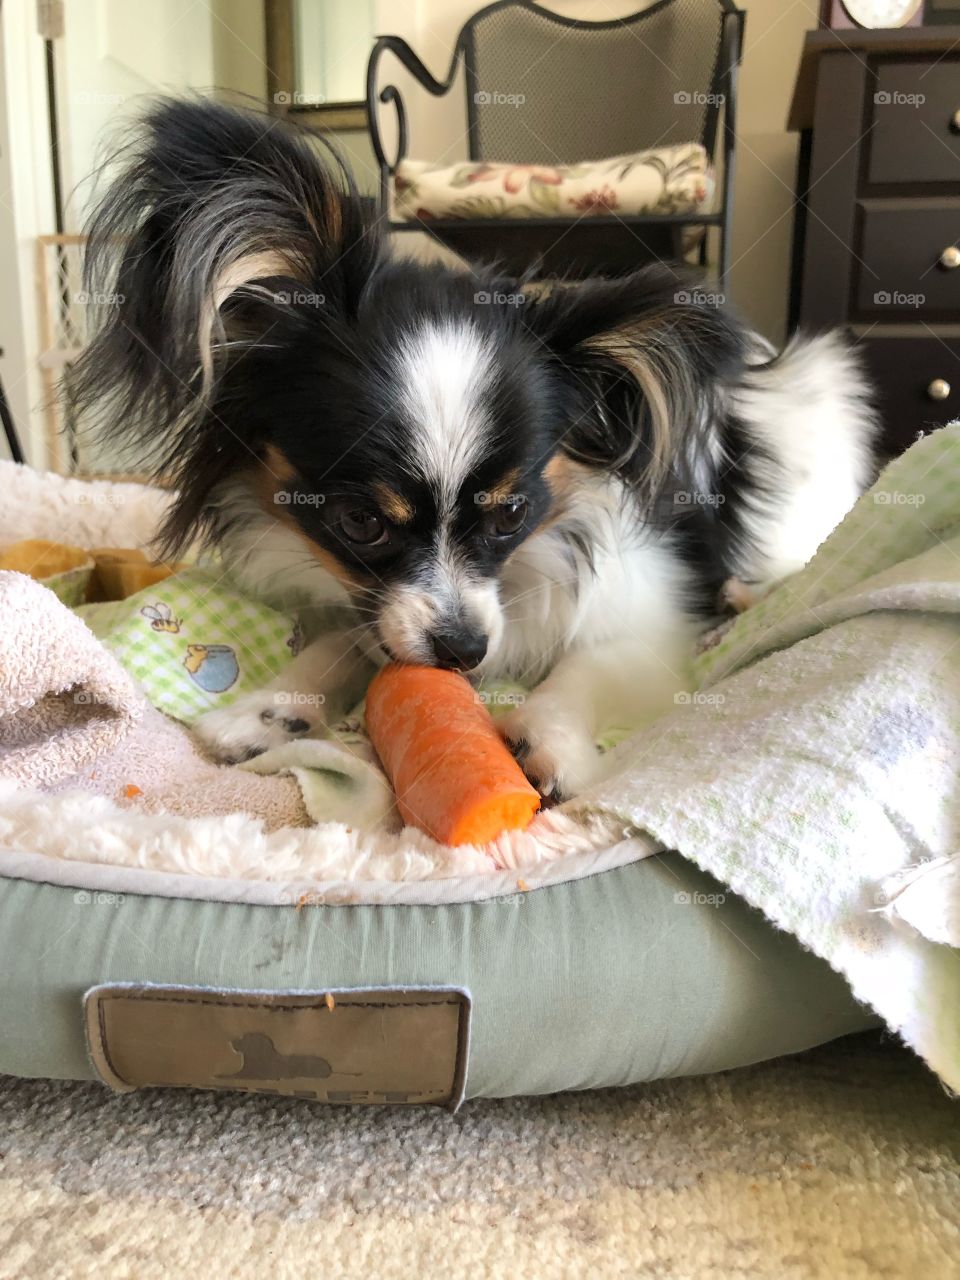 Don’t even think about taking my carrot!! 